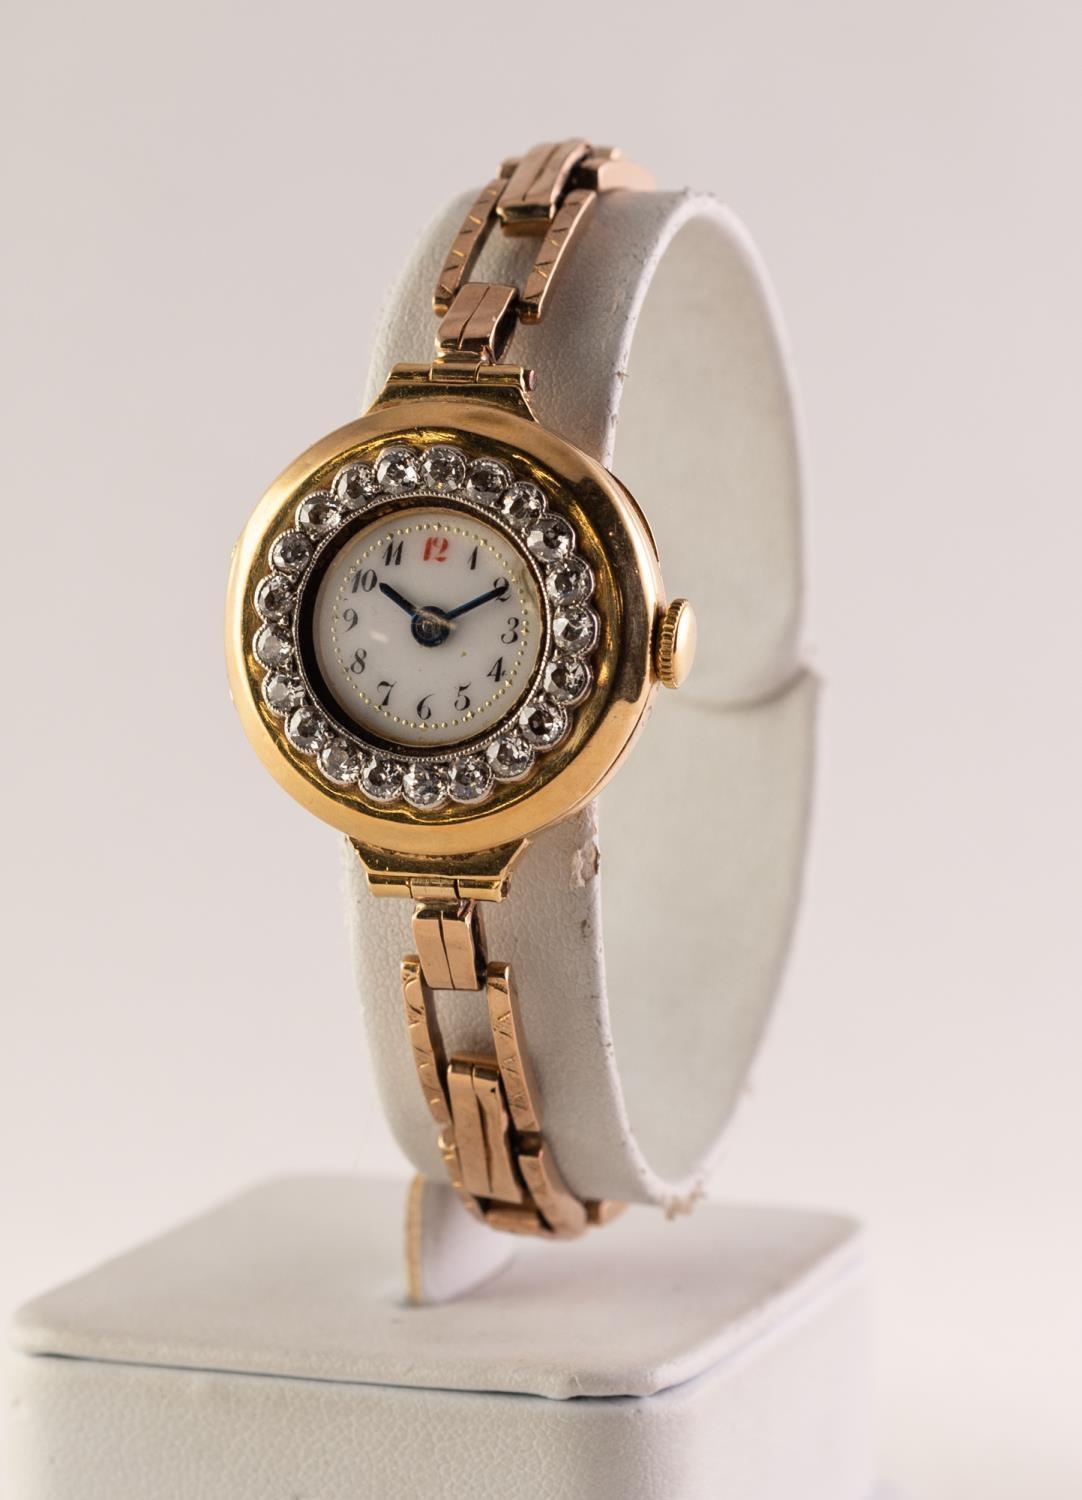 EARLY 20th CENTURY 18ct GOLD CASED LADY'S WRISTWATCH with 15 jewel movement, the besel set with 21